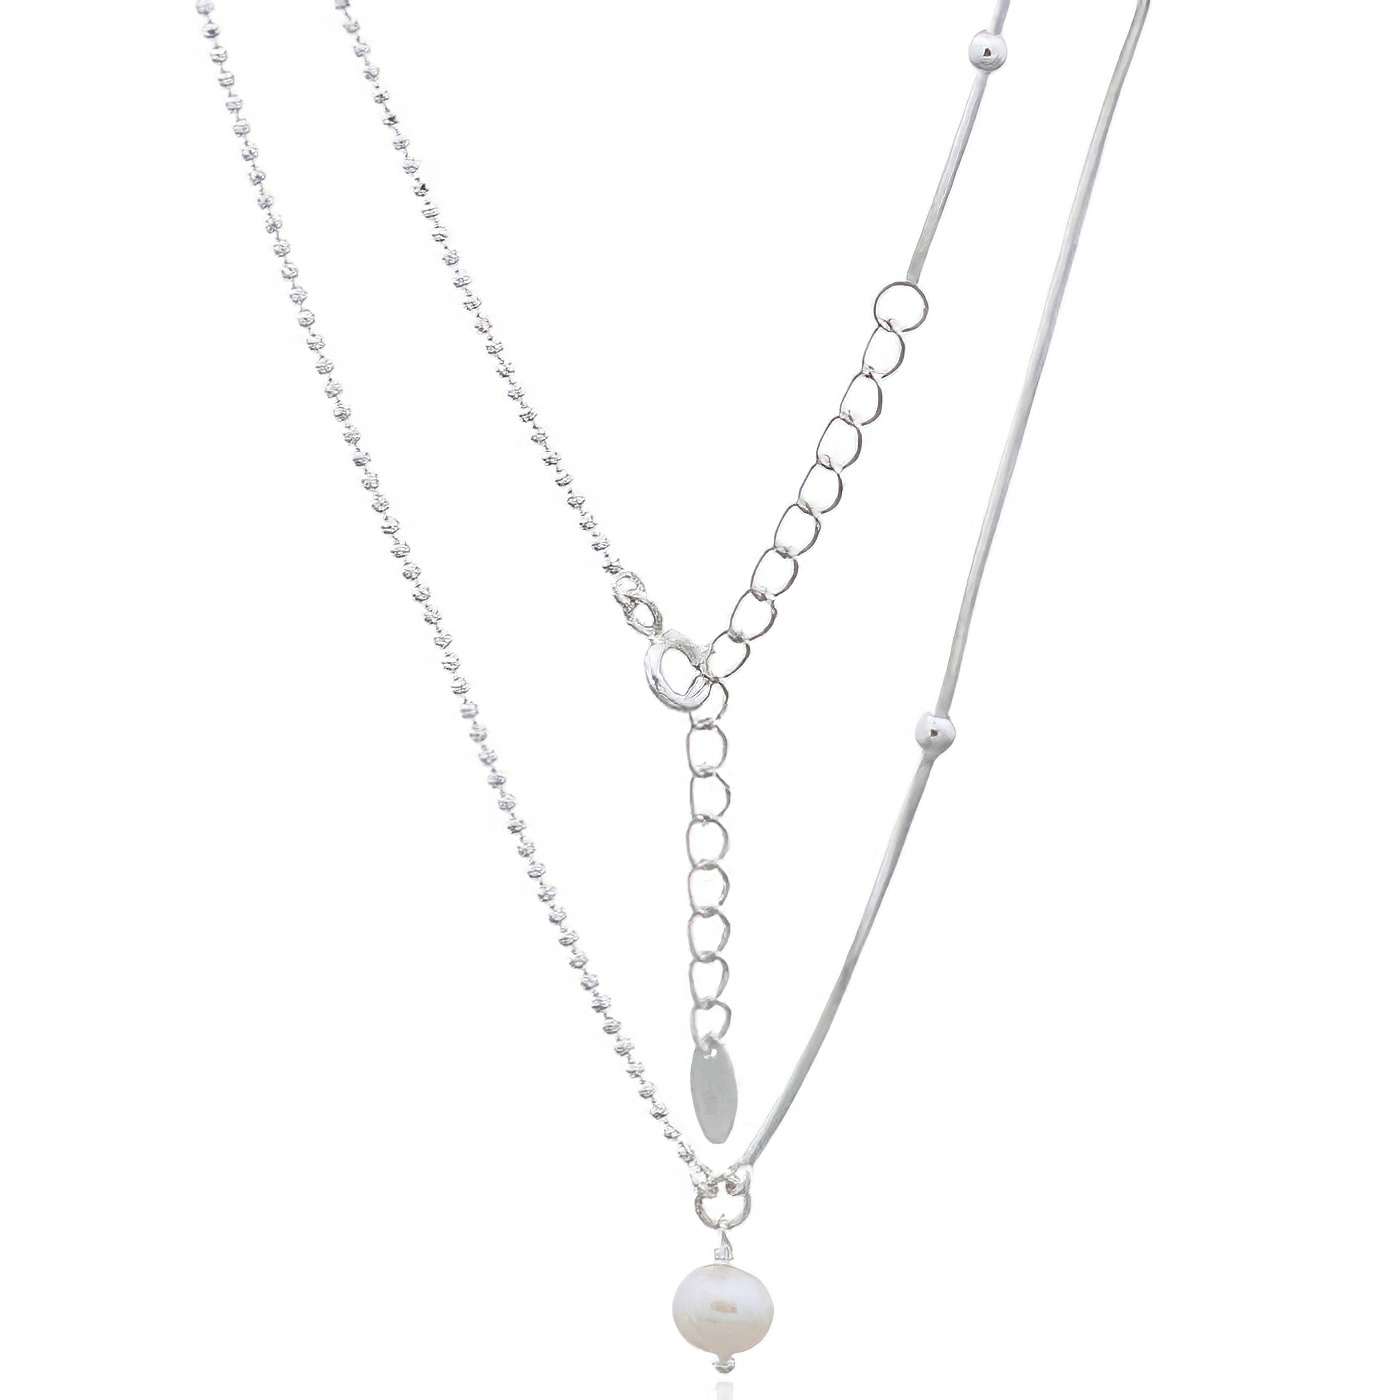 Simply Elegant Freshwater Pearl 925 Silver Necklace by BeYindi 